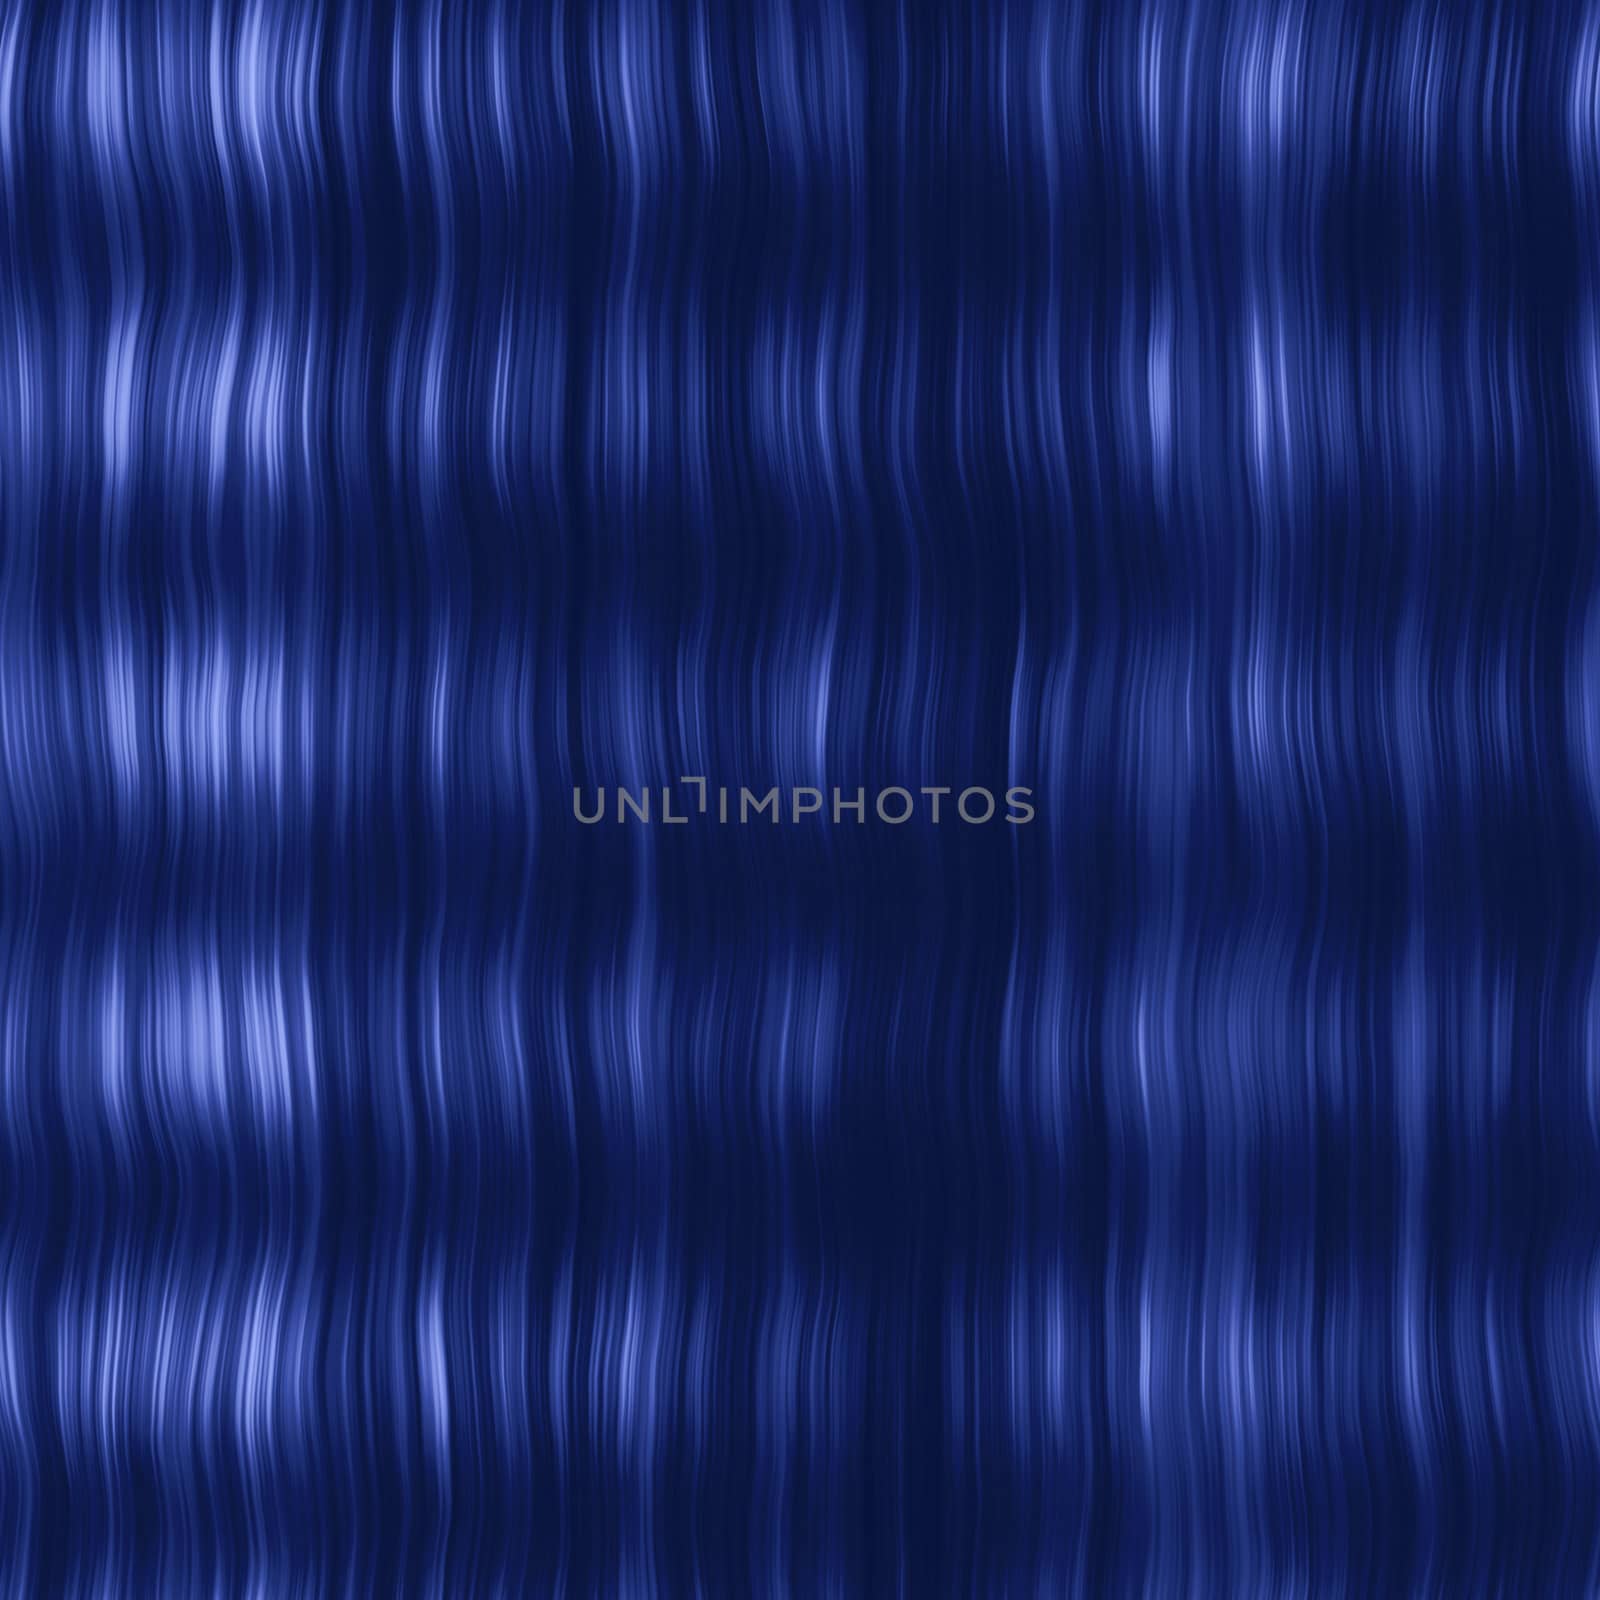 blue hair or curtain background texture, tiles seamlessly